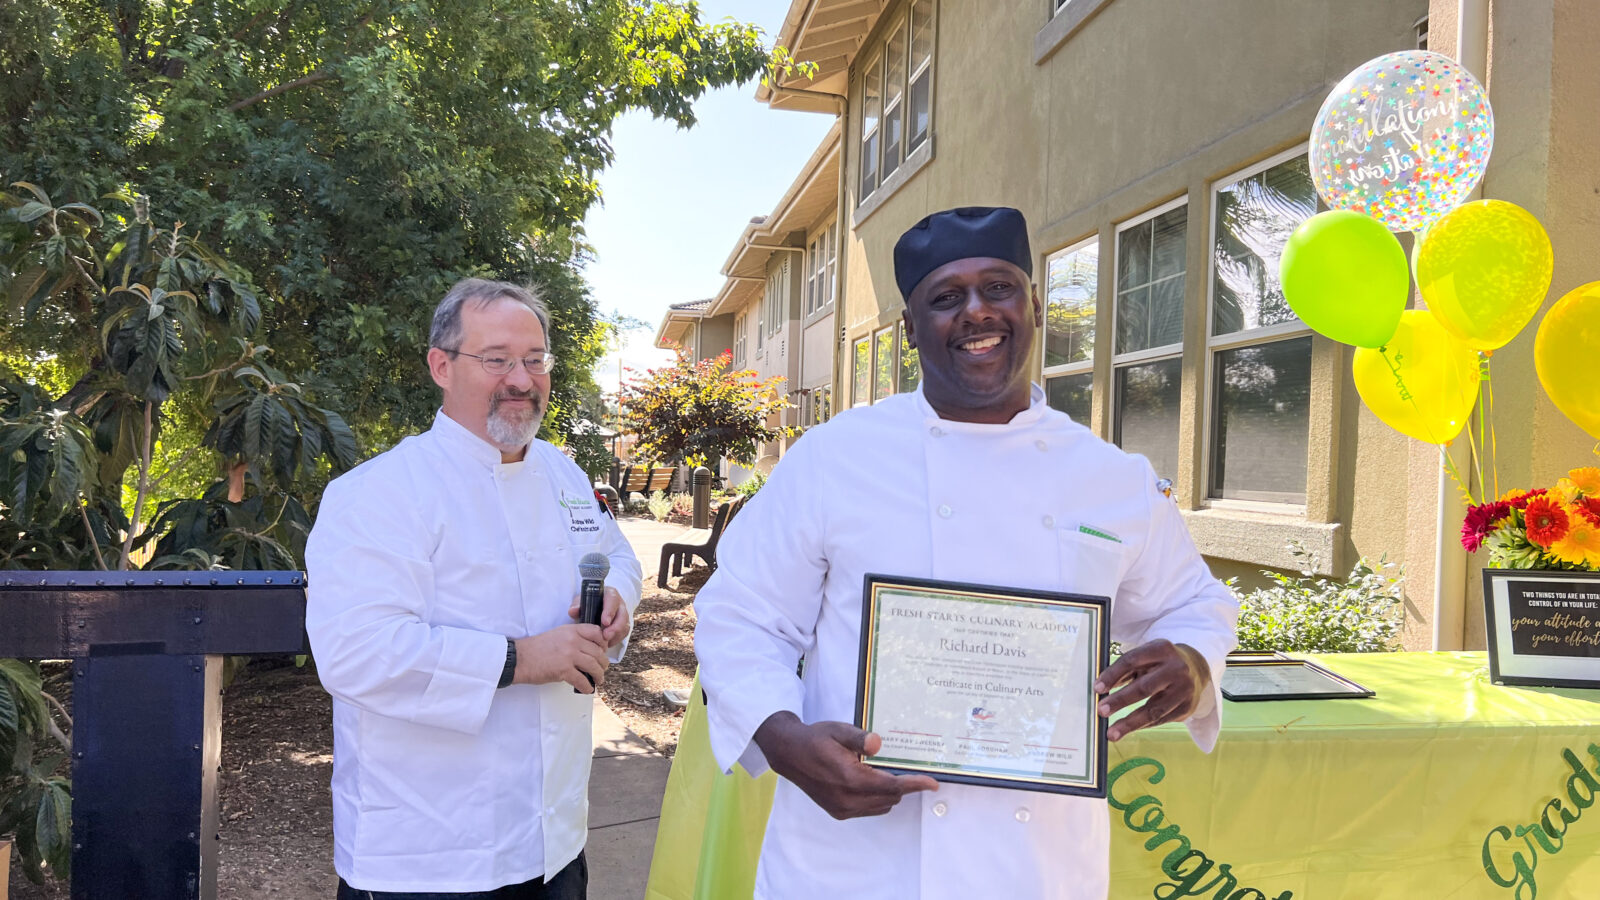 A man holds up his certificate of culinary arts after completing the fresh starts culinary academy. His teacher stands next to him.